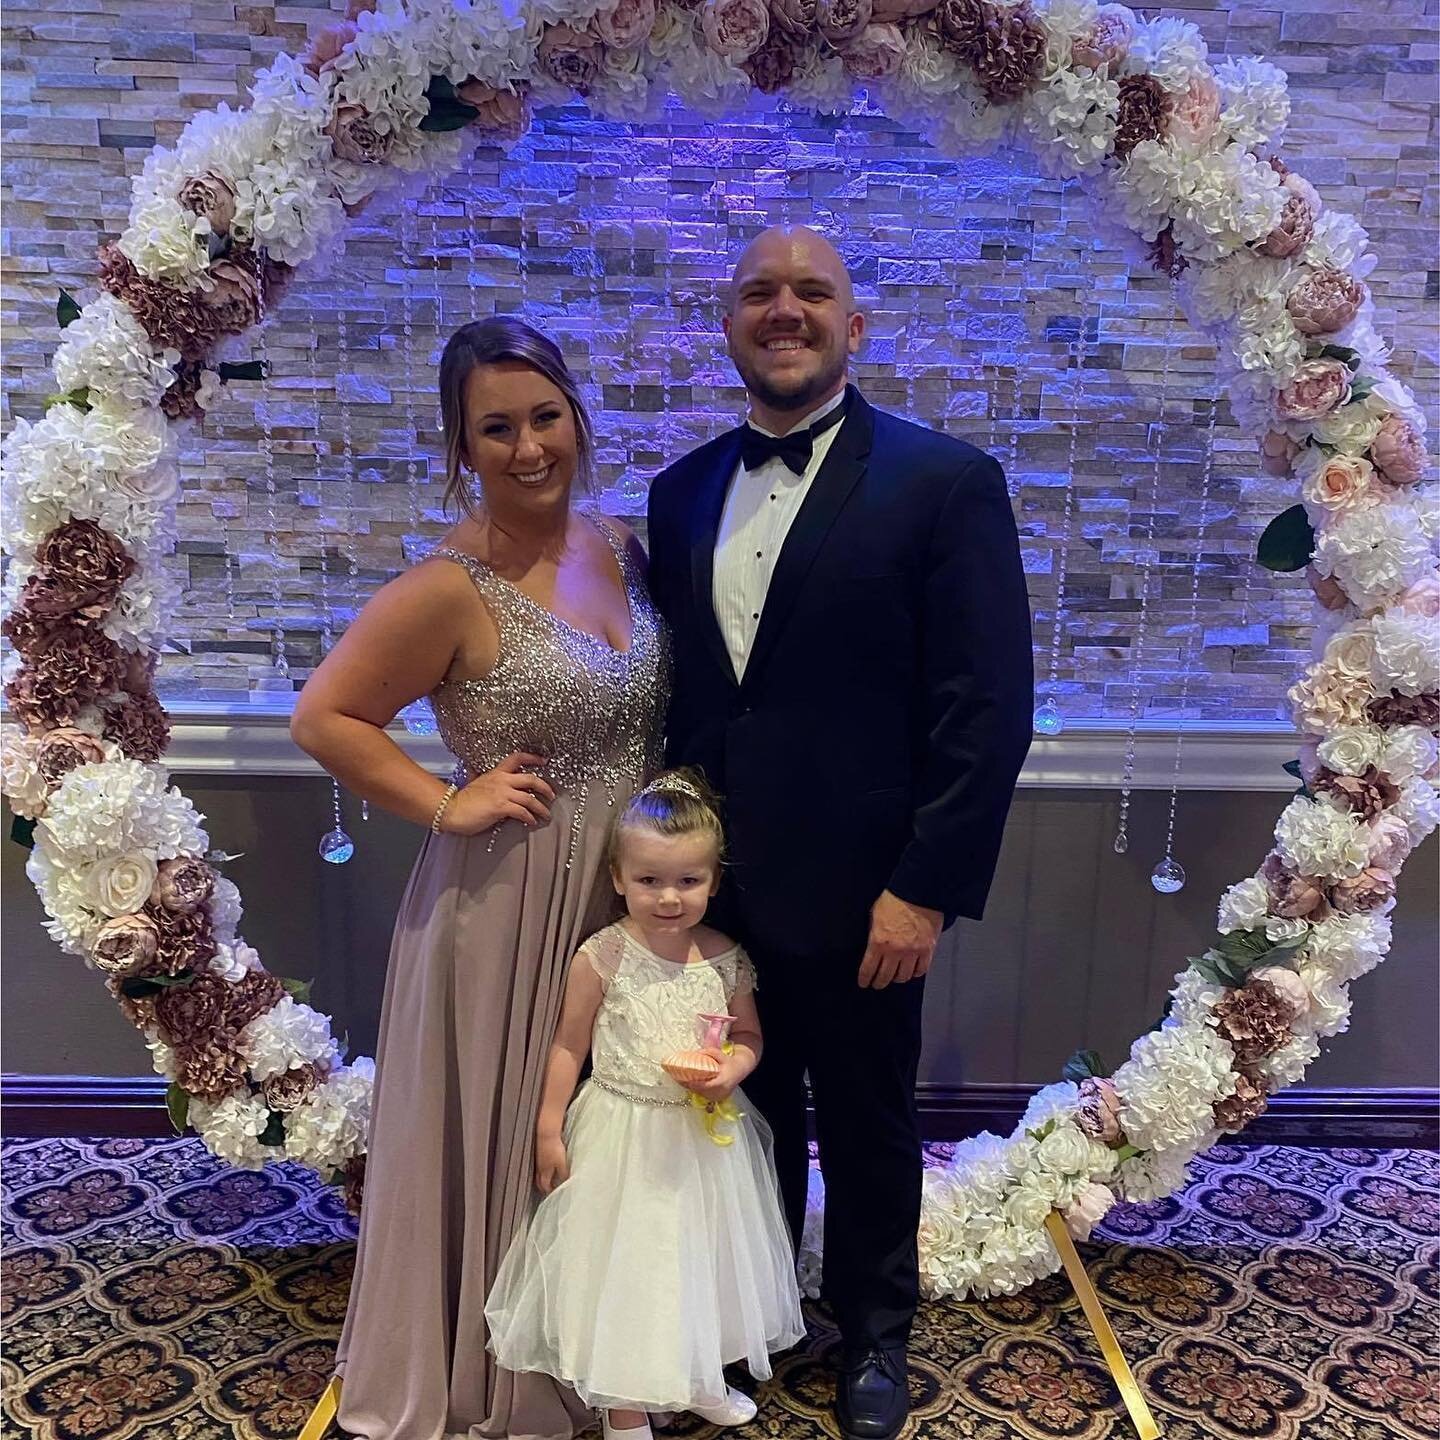 Flower Girl, Bridesmaid, DJ and proud daddy of the flower girl / husband of the bridesmaid. I&rsquo;d say that&rsquo;s the definition of wedding royalty right there. Love my little family of 3 #weddingseason #LetsCelebrate #StlDJ #ChicagoDJ #Family